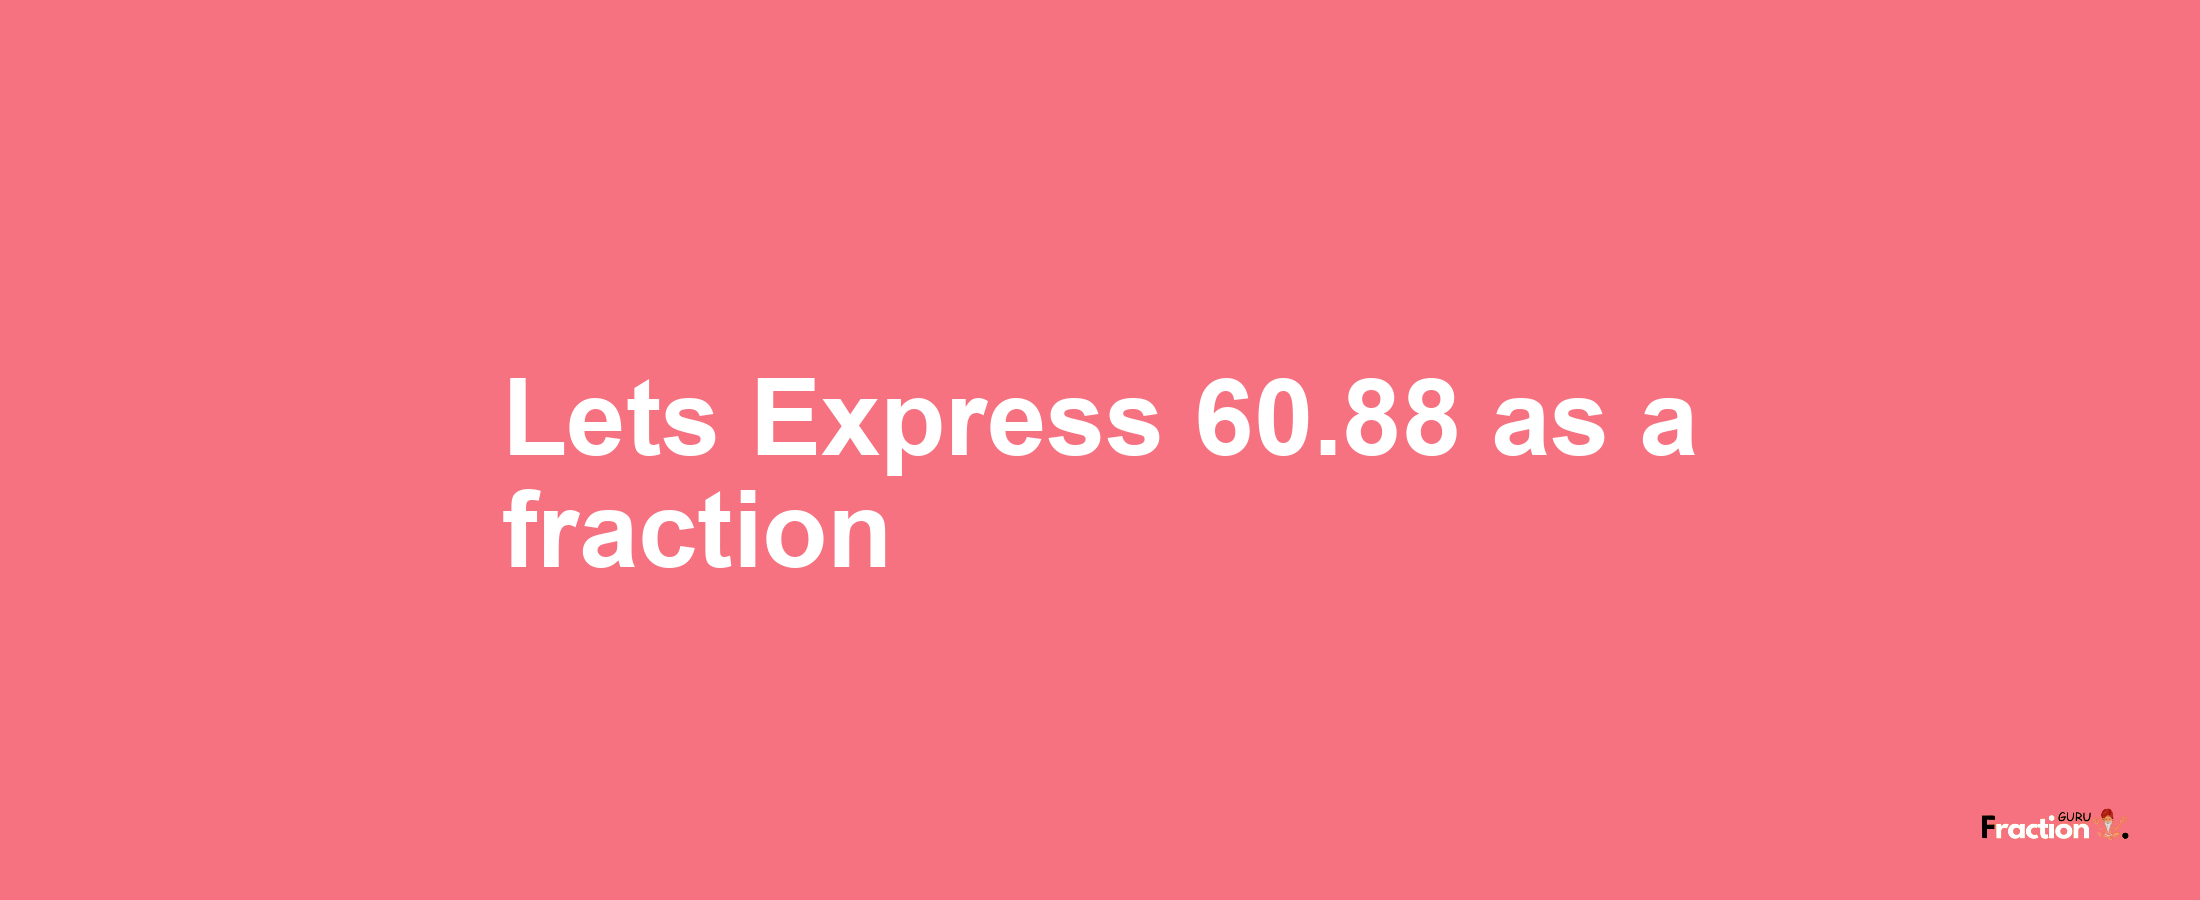 Lets Express 60.88 as afraction